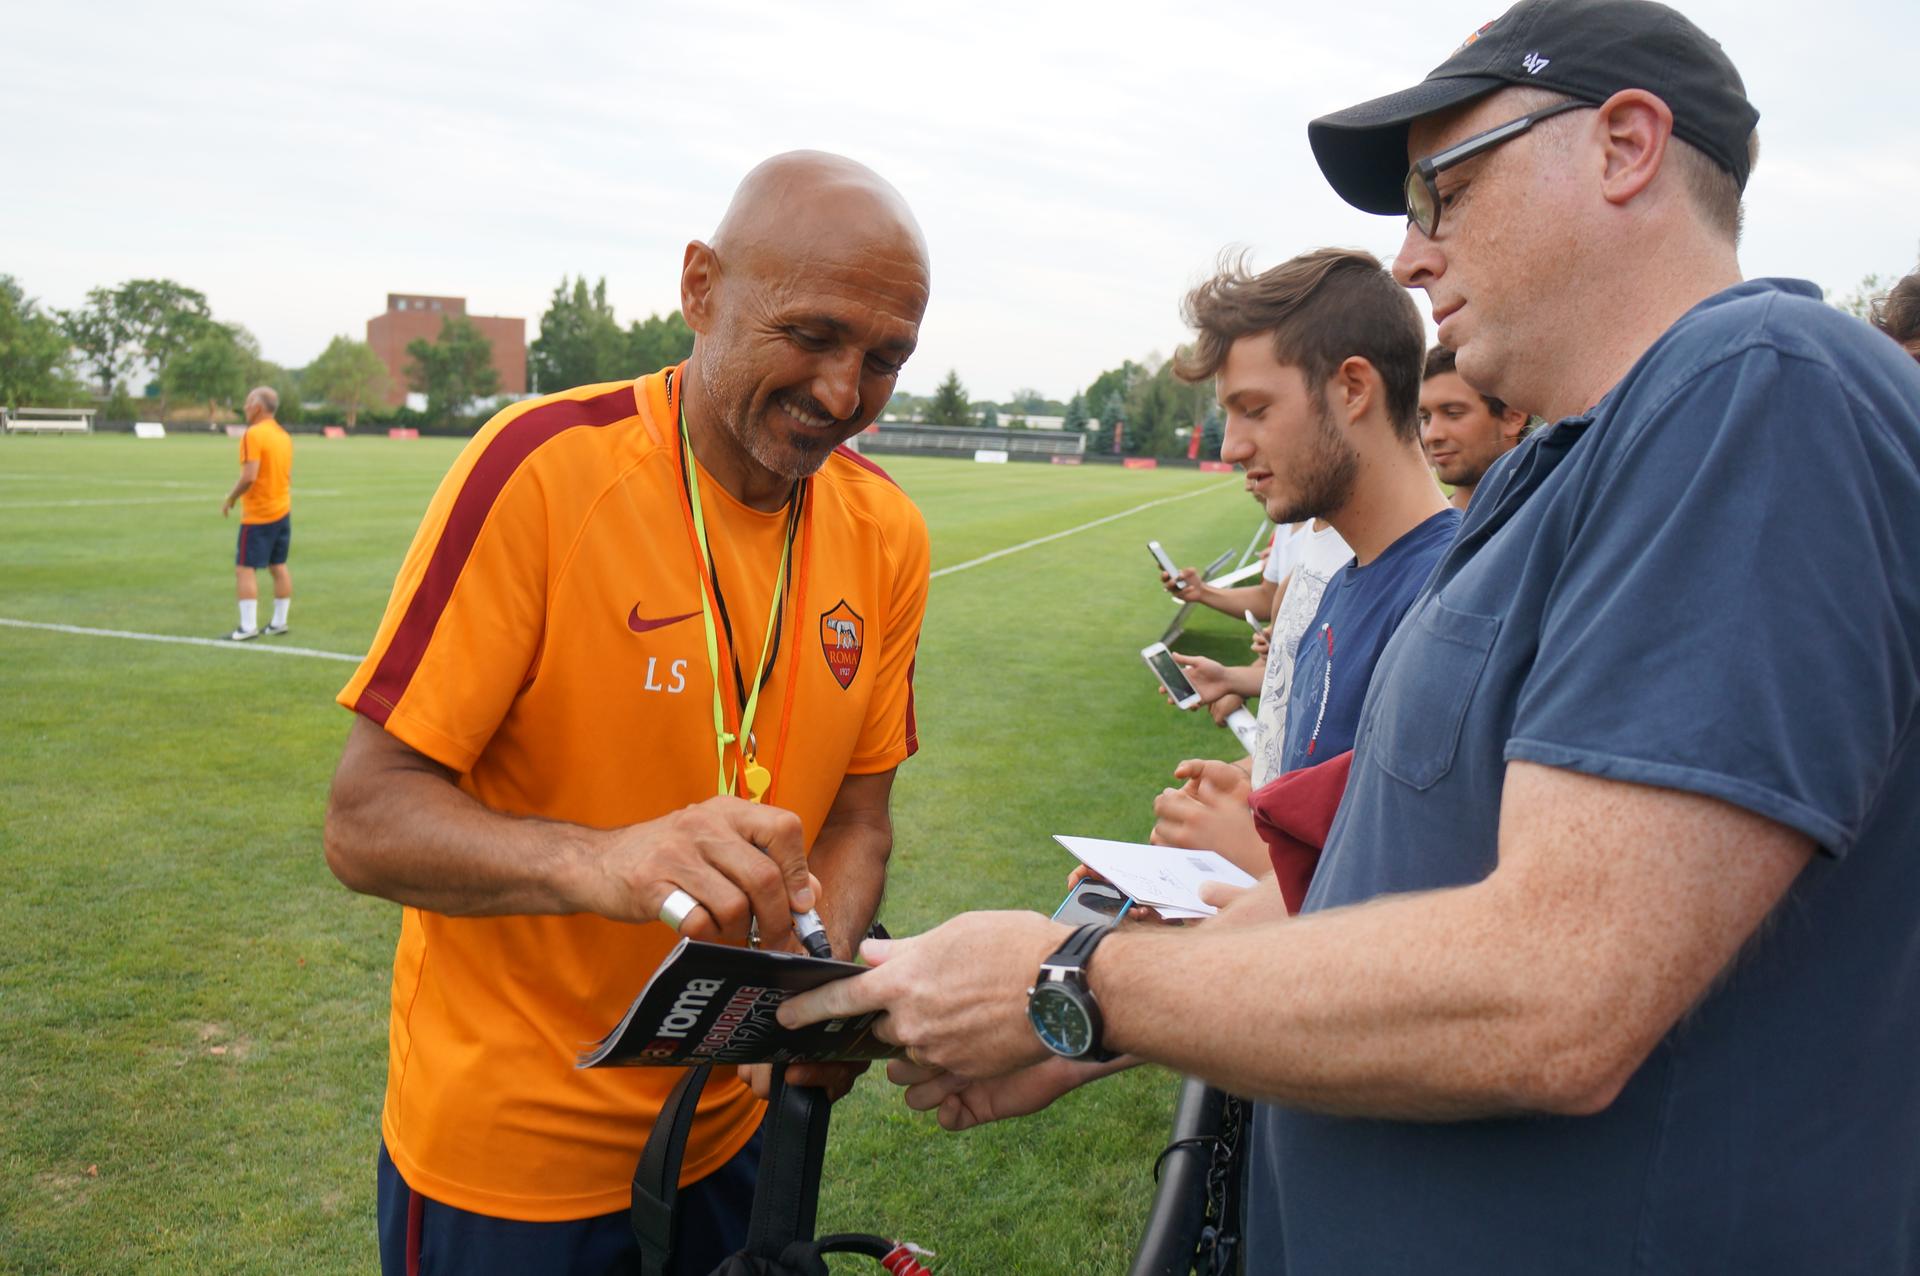 AS Roma’s coach Luciano Spalletti gives out signatures to fans. Some Russian fans called out ‘Zenit are Champions!’ to Spalletti who used to be the coach of the St. Petersburg team. Spalletti responded with a few Russian phrases which were greeted with